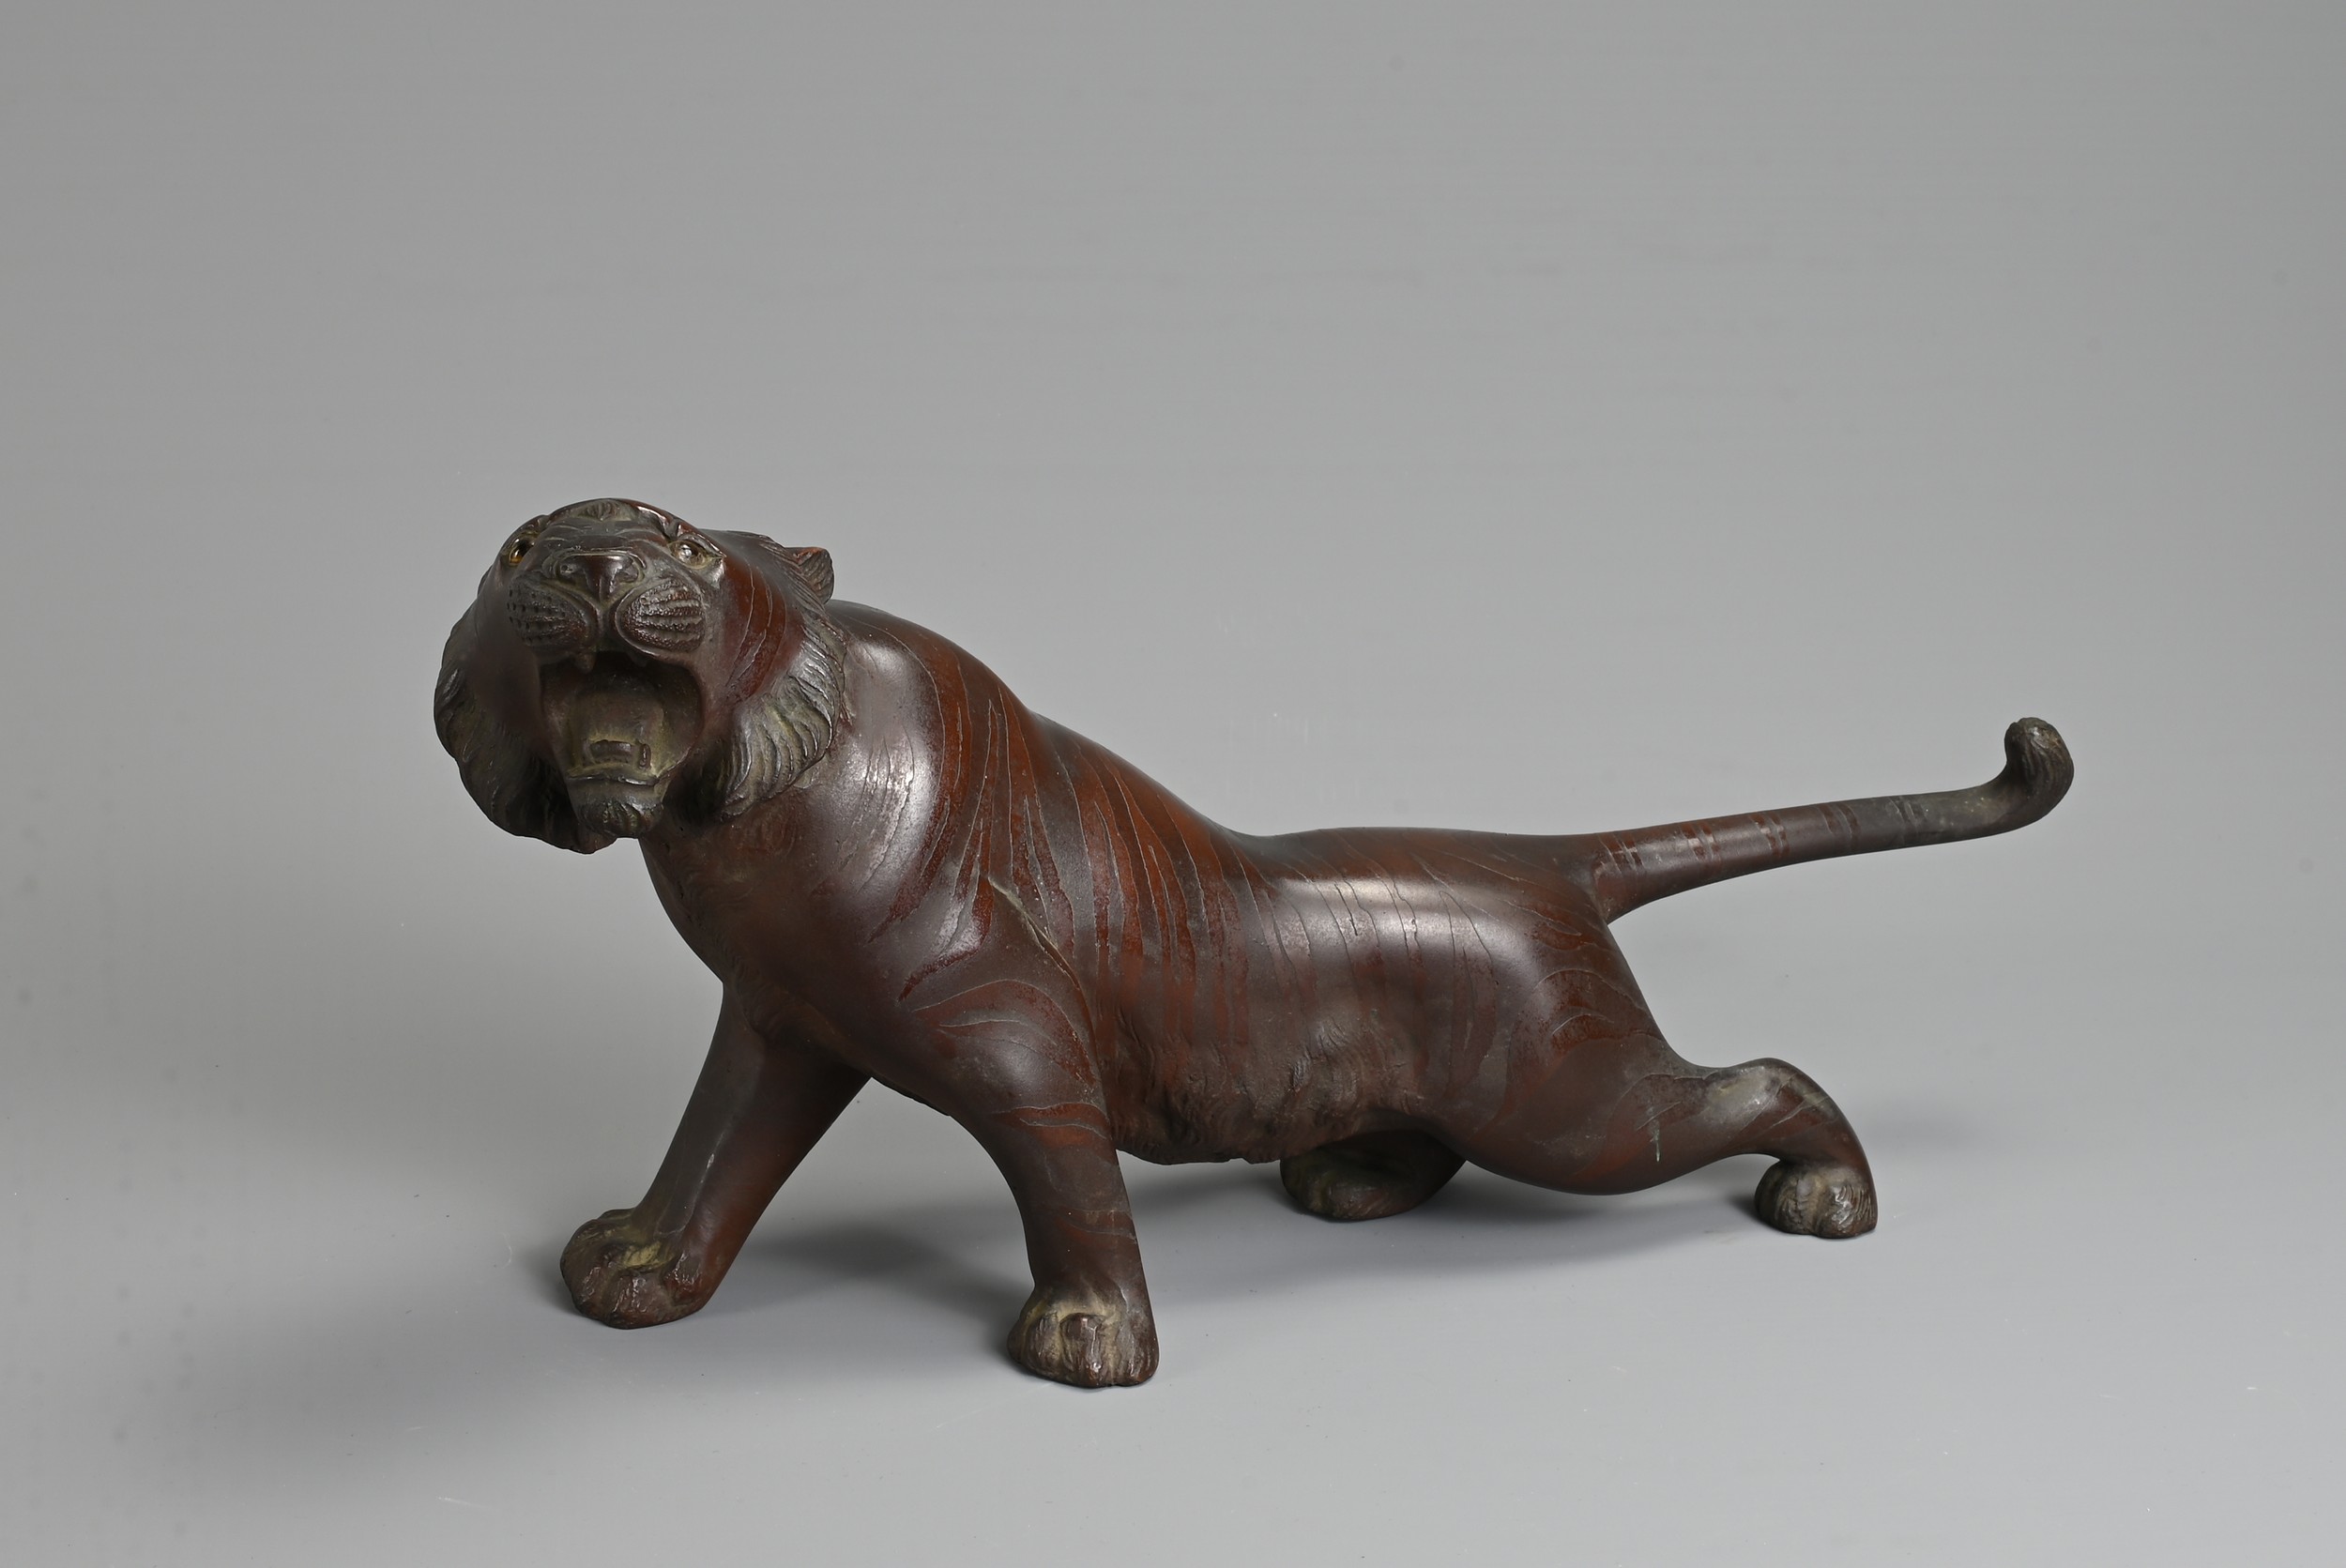 A LATE 19TH/EARLY 20TH CENTURY JAPANESE BRONZE OKIMONO OF A TIGER BY NOBUMITSU. Naturalistically